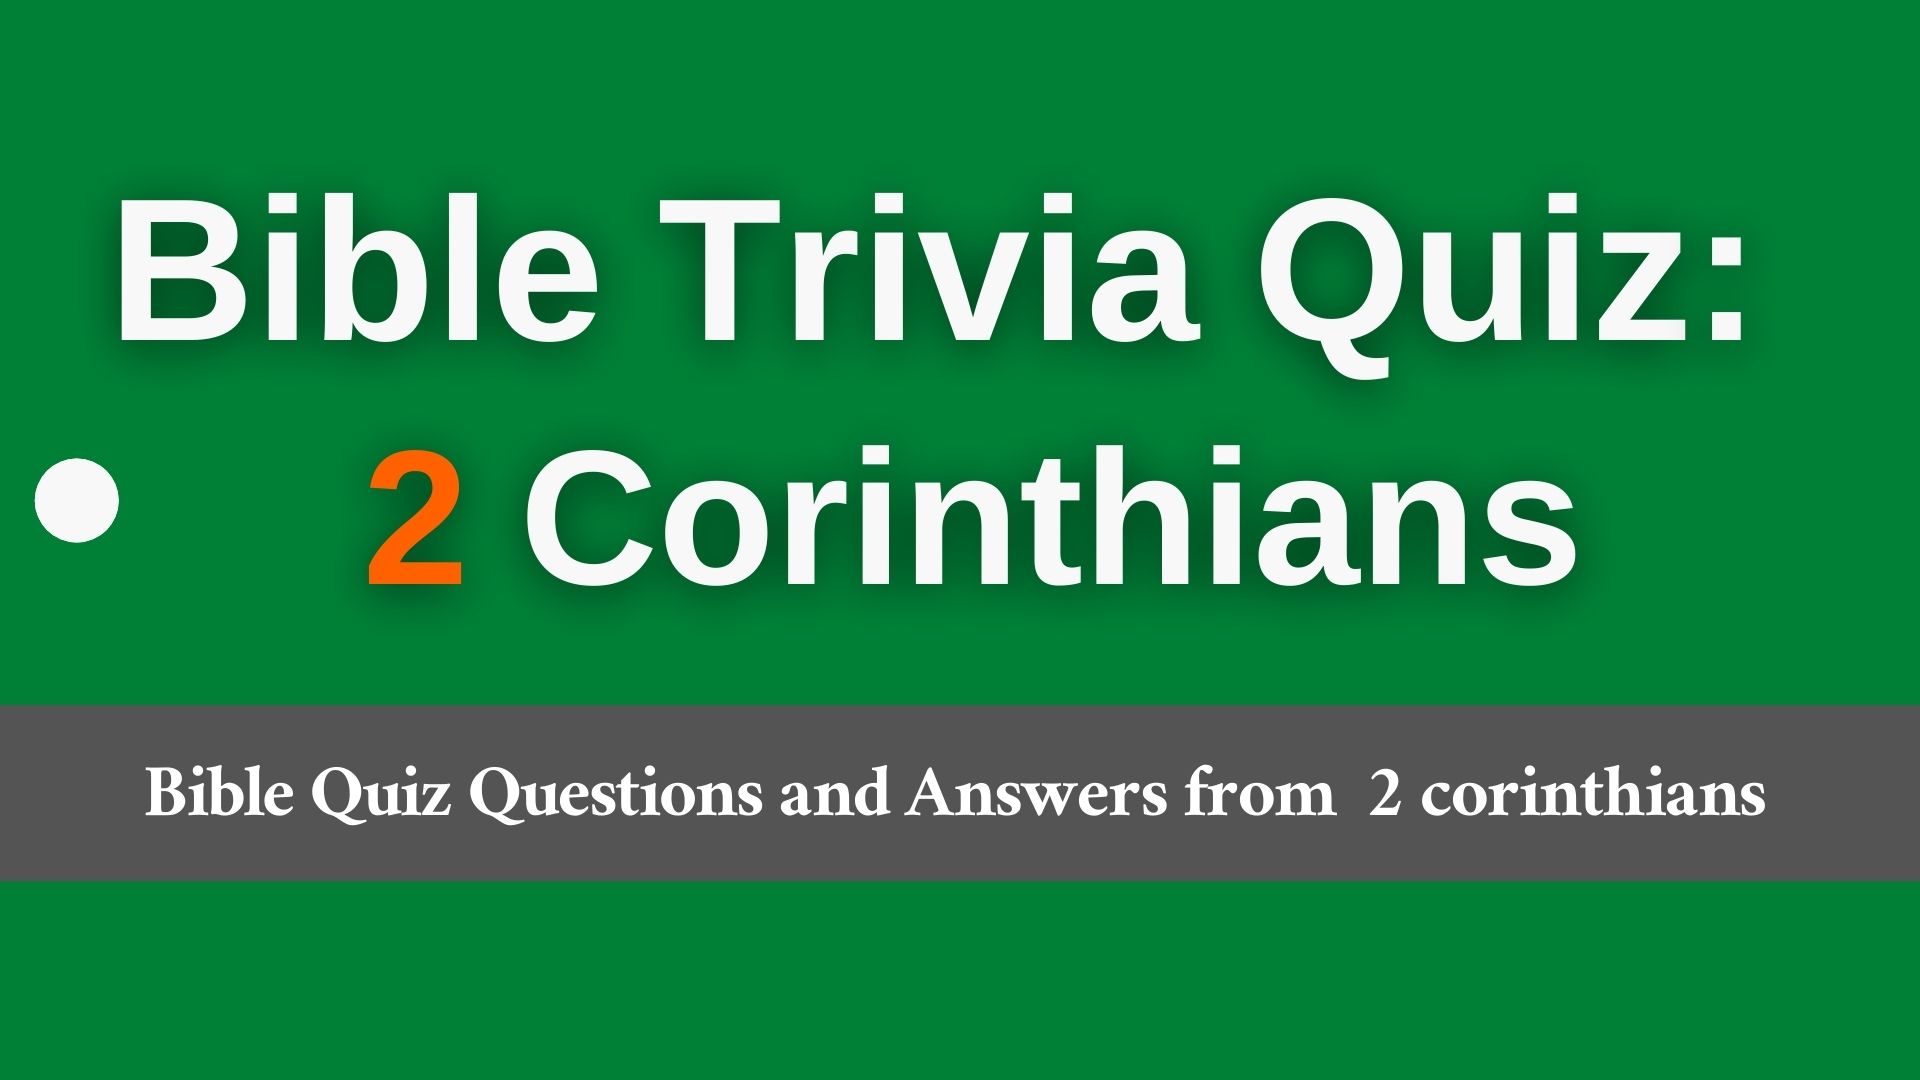 telugu-bible-quiz-questions-and-answers-from-2-corinthians